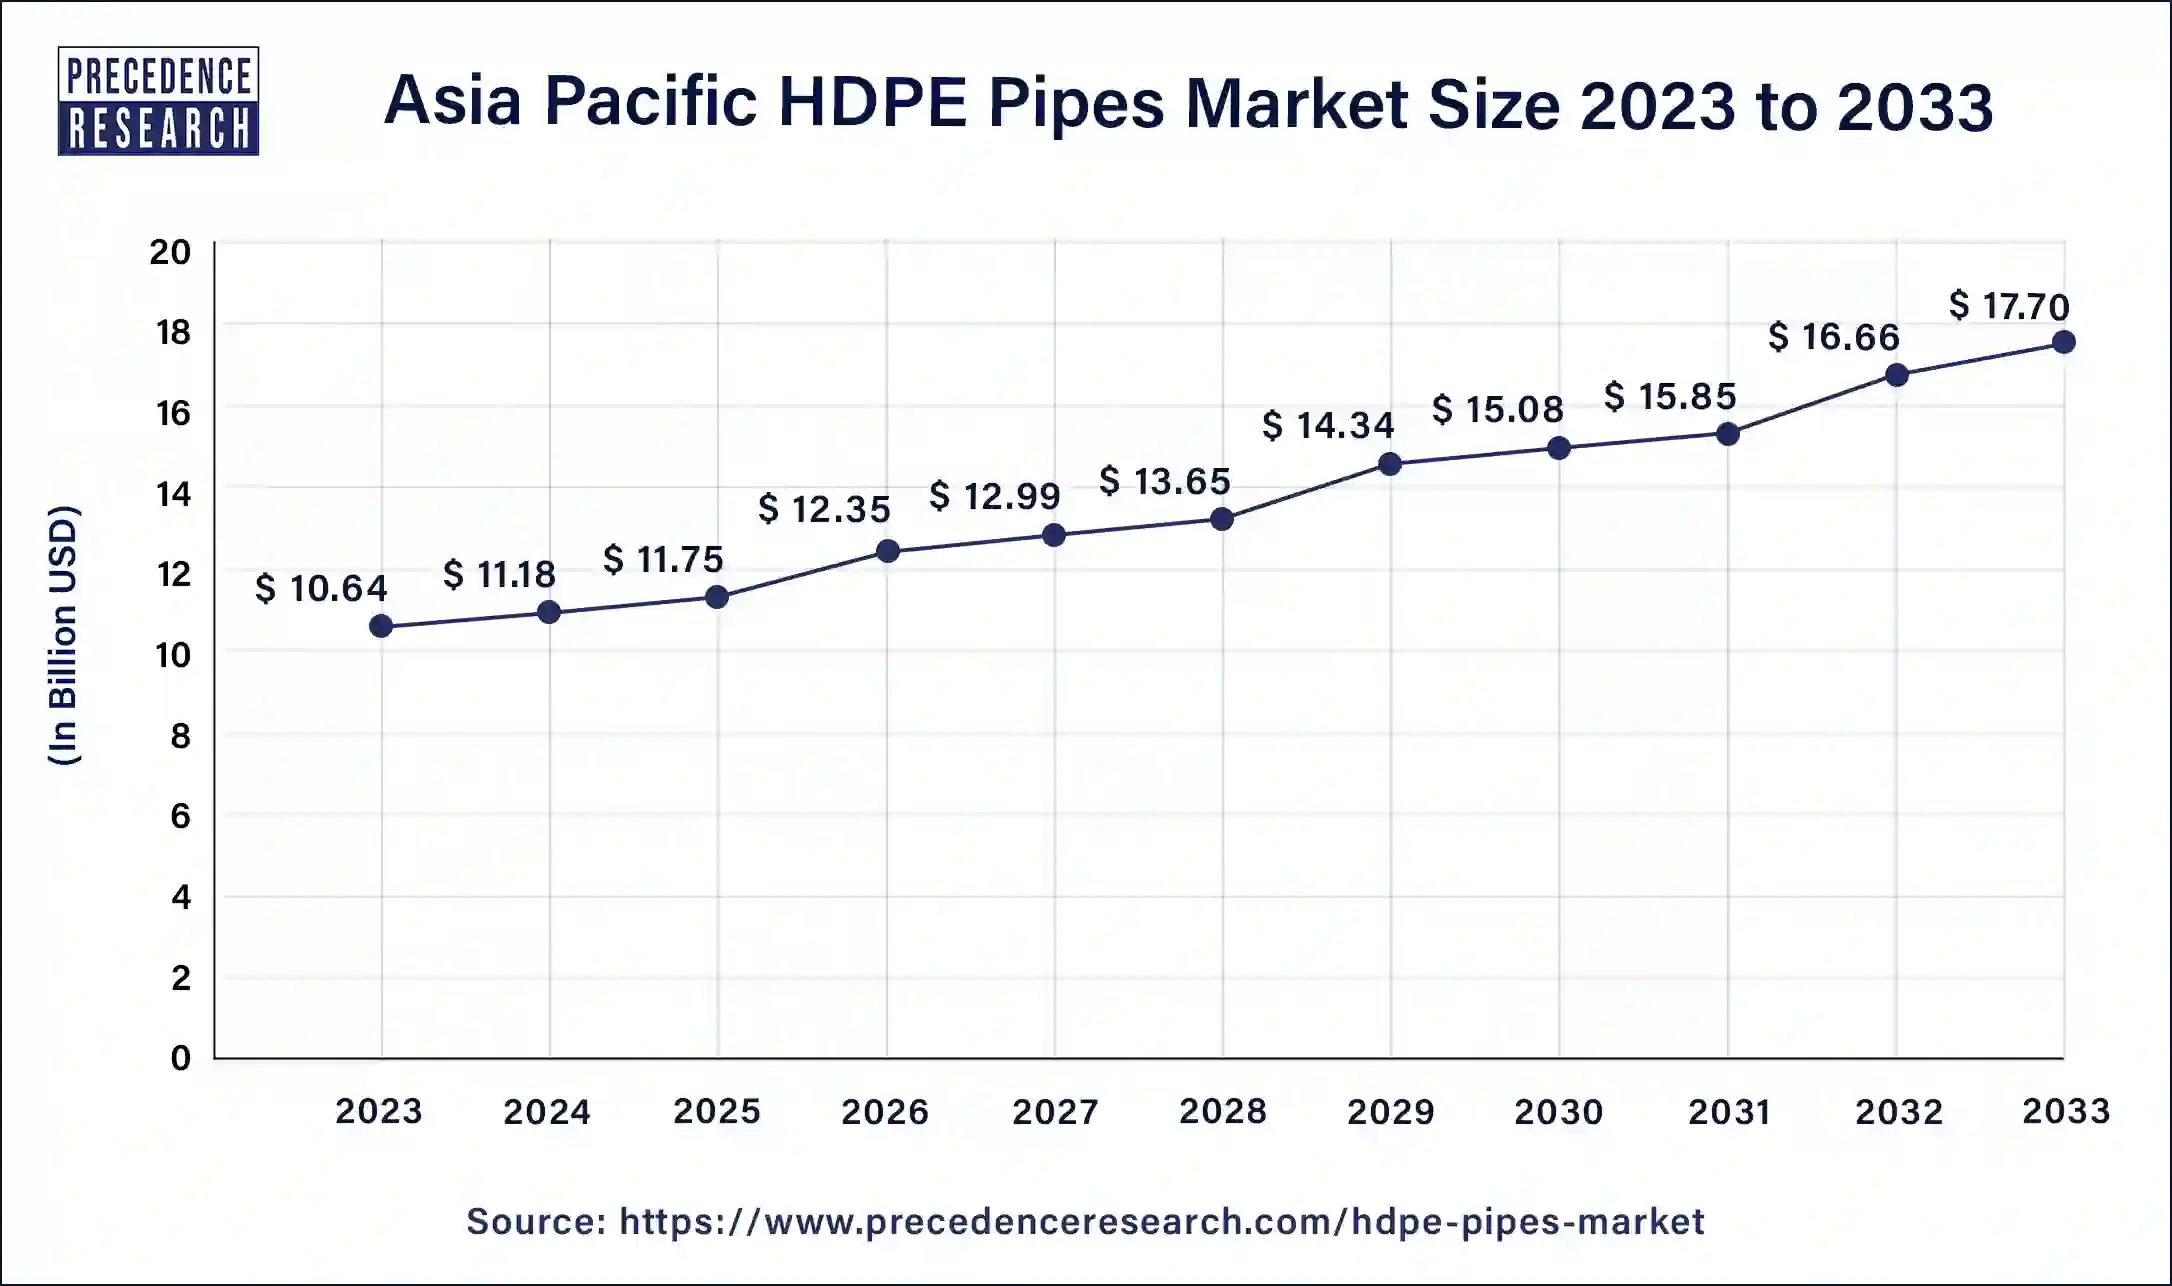 Asia Pacific HDPE Pipes Market Size 2024 to 2033